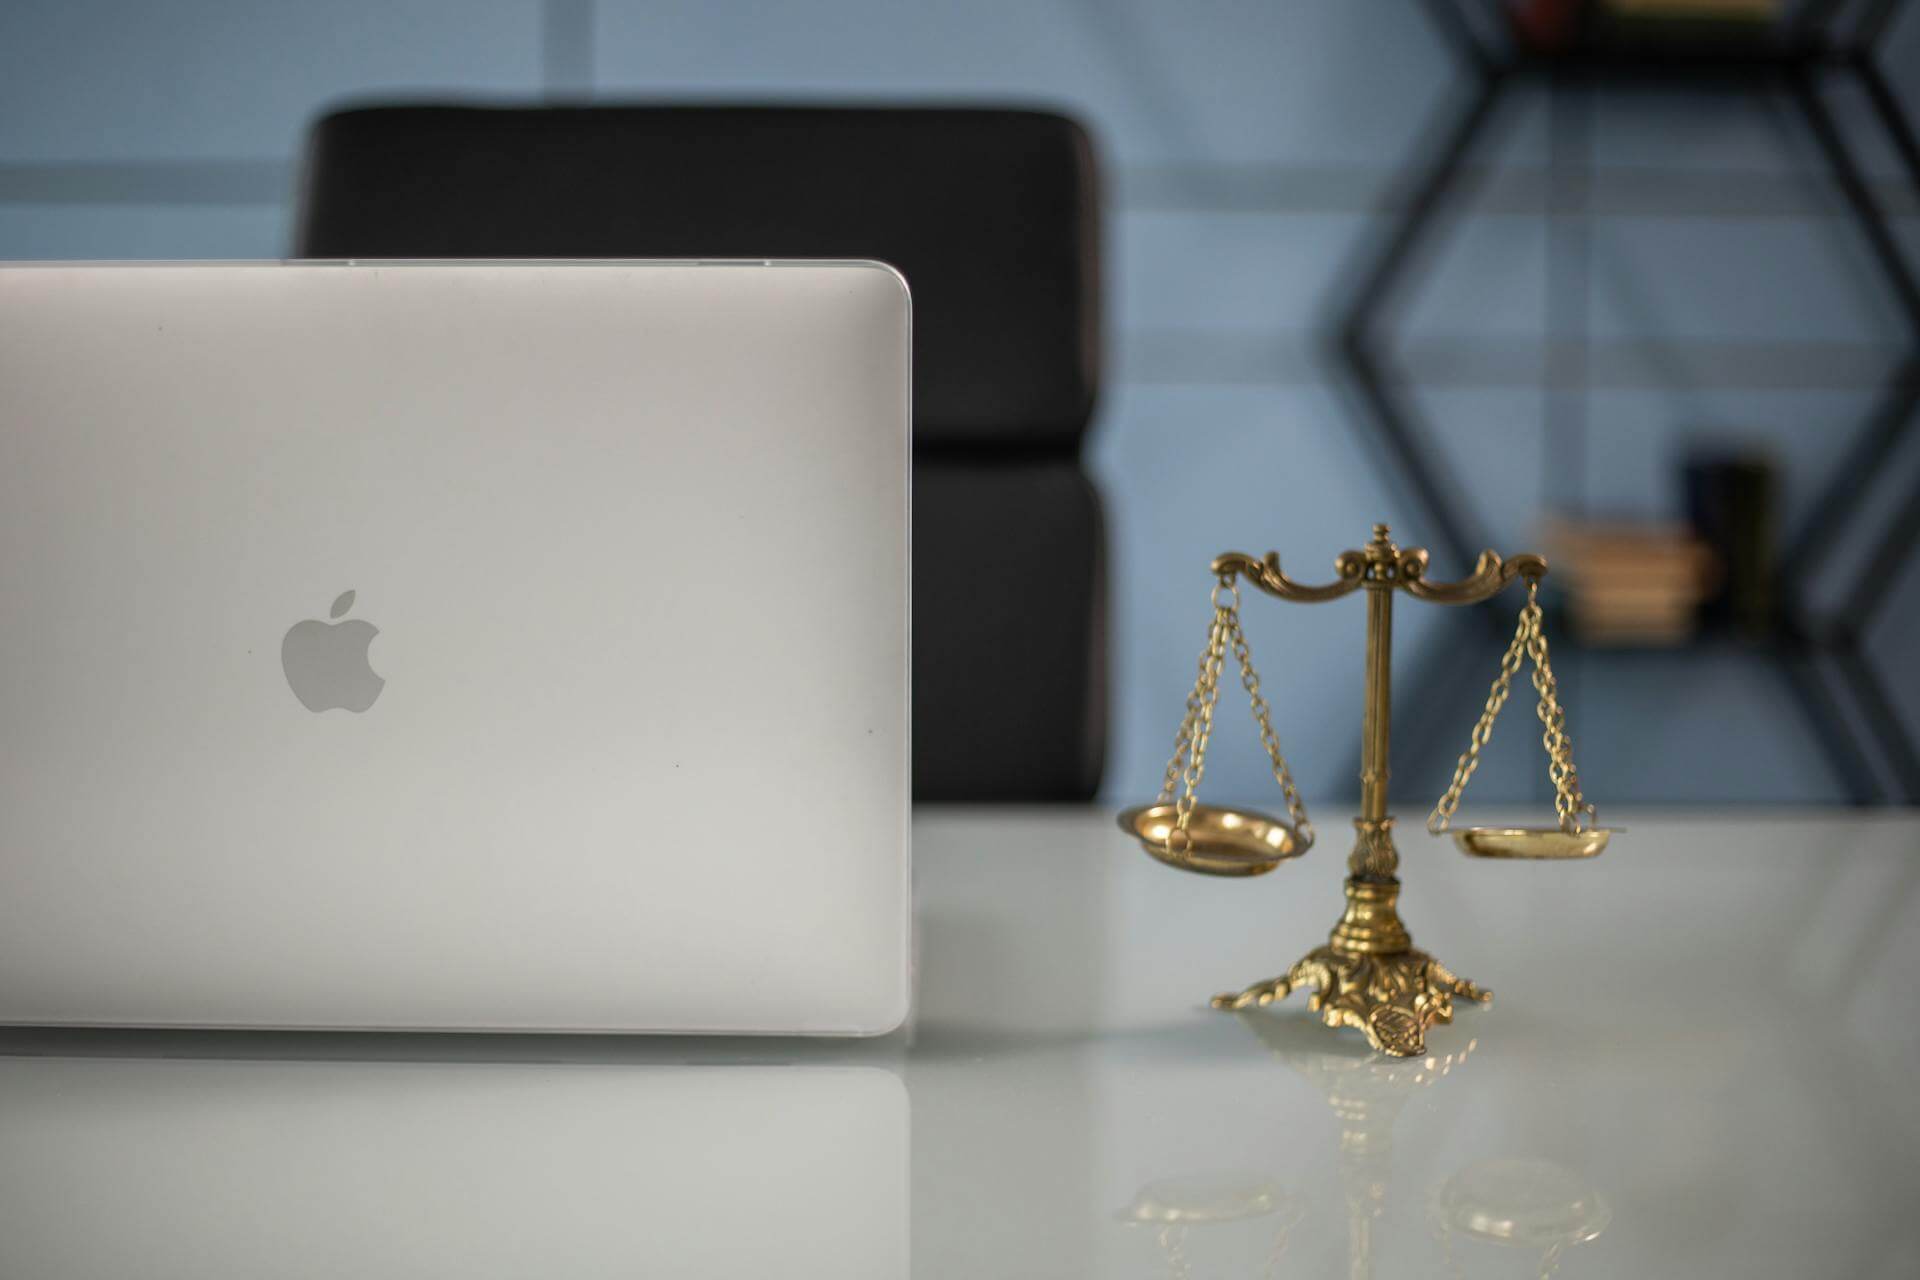 The scales of justice sitting next to a laptop.